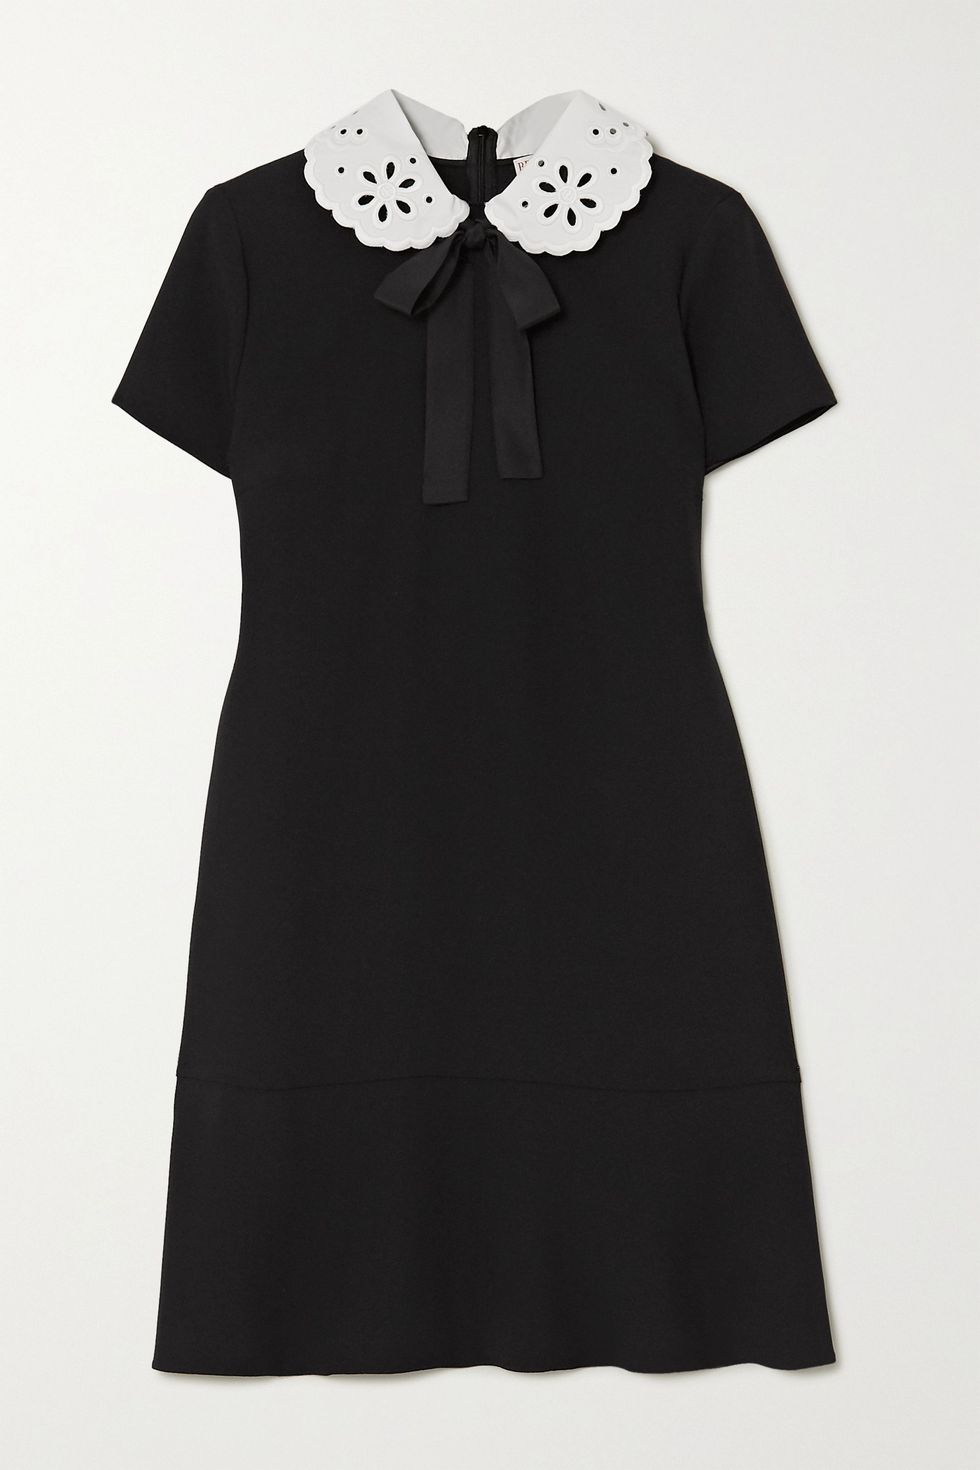 8 Little Black Dresses to Wear this Halloween